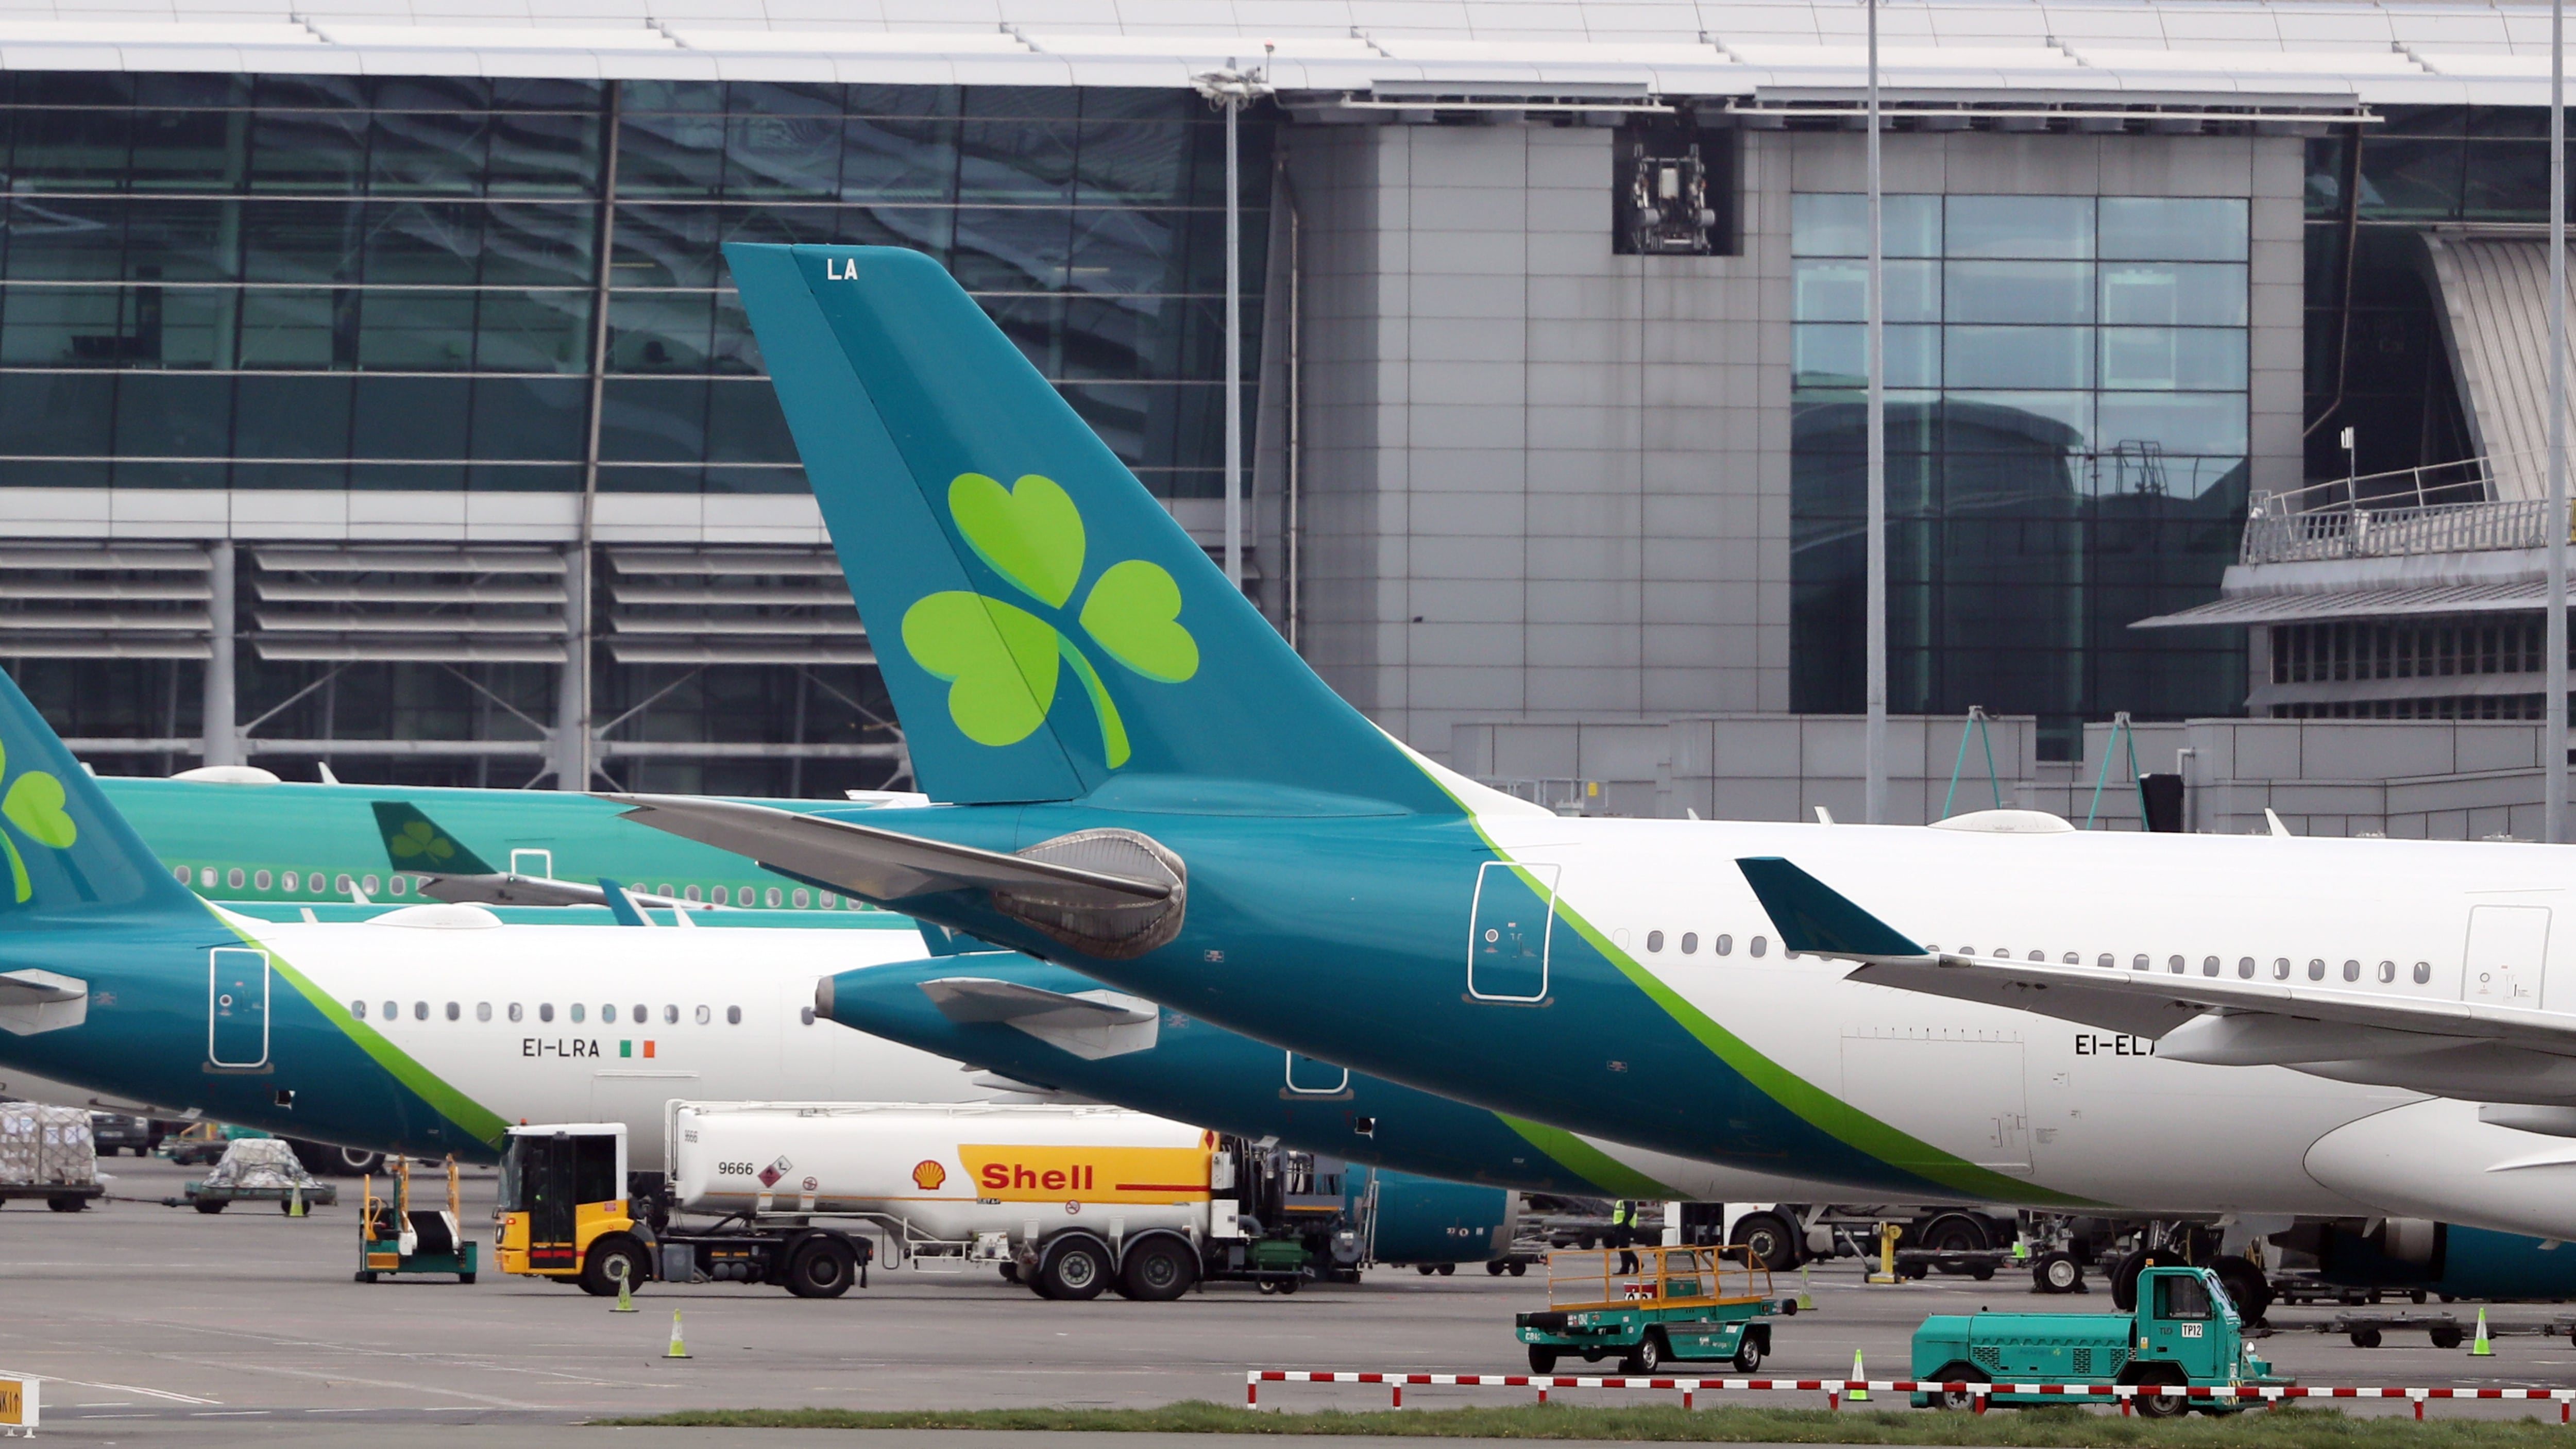 Pilots at Aer Lingus have served noticed to the airline that they intend to go on an ‘indefinite’ work to rule starting next week